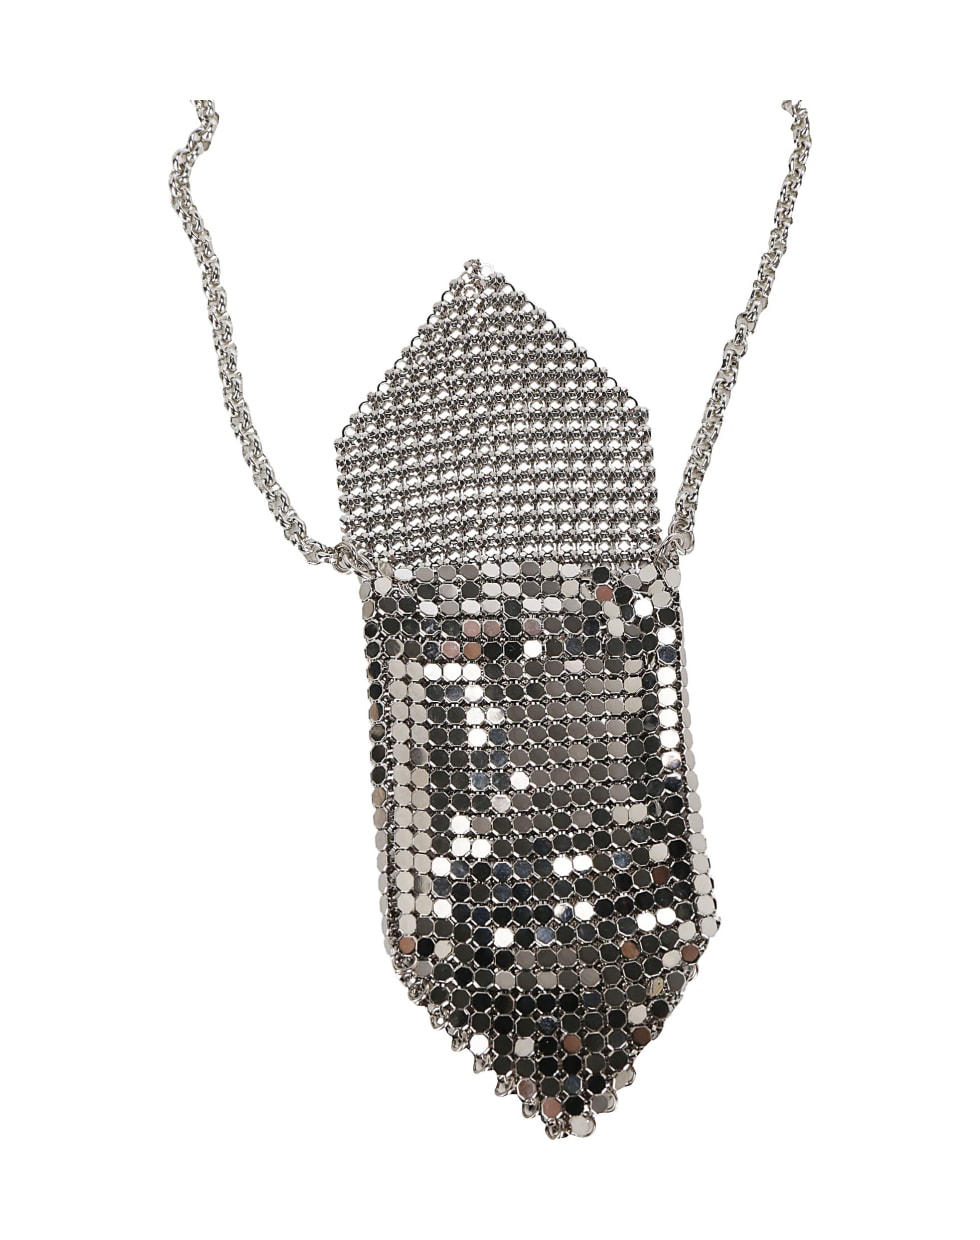 Paco Rabanne Necklace - Silver